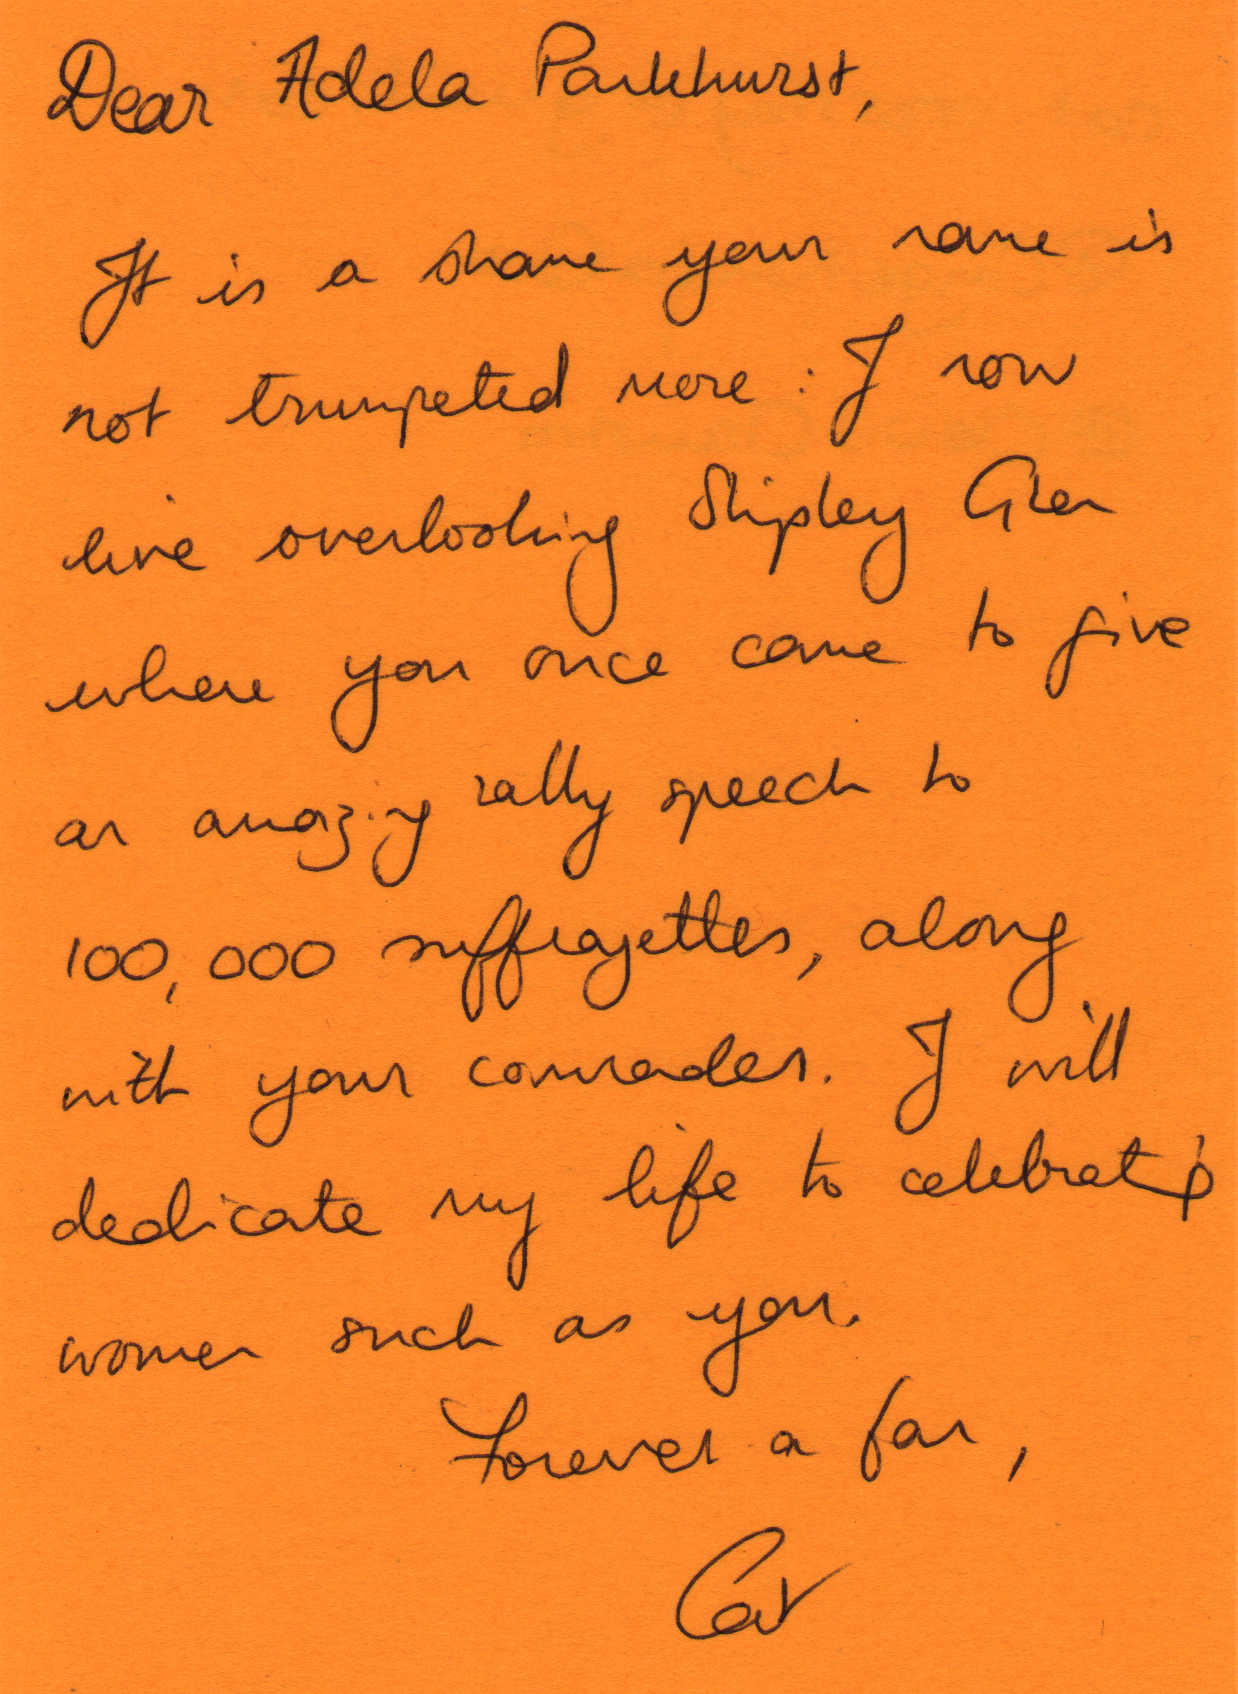 Scan of the letter